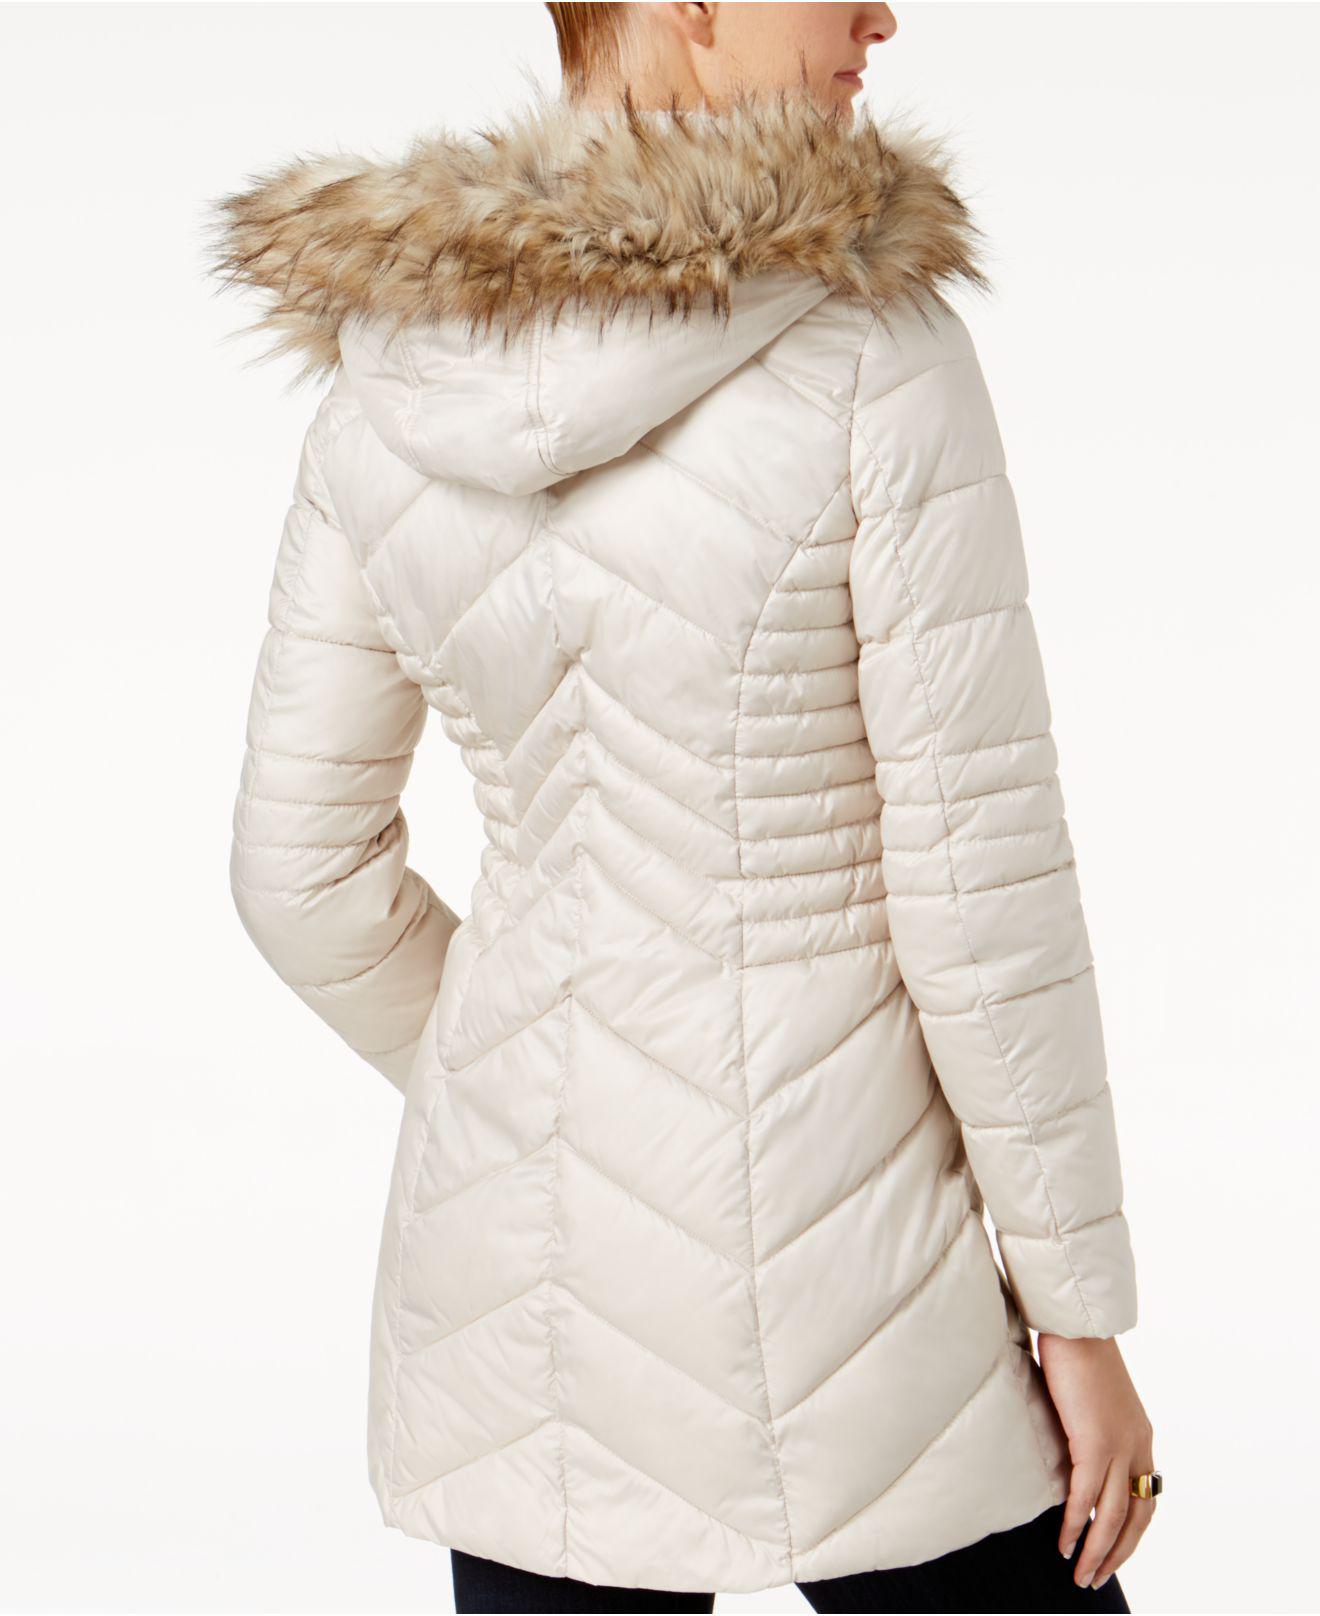 Laundry By Shelli Segal Faux Fur Trimmed Cinched Waist Puffer Jacket  France, SAVE 50% - loutzenhiserfuneralhomes.com